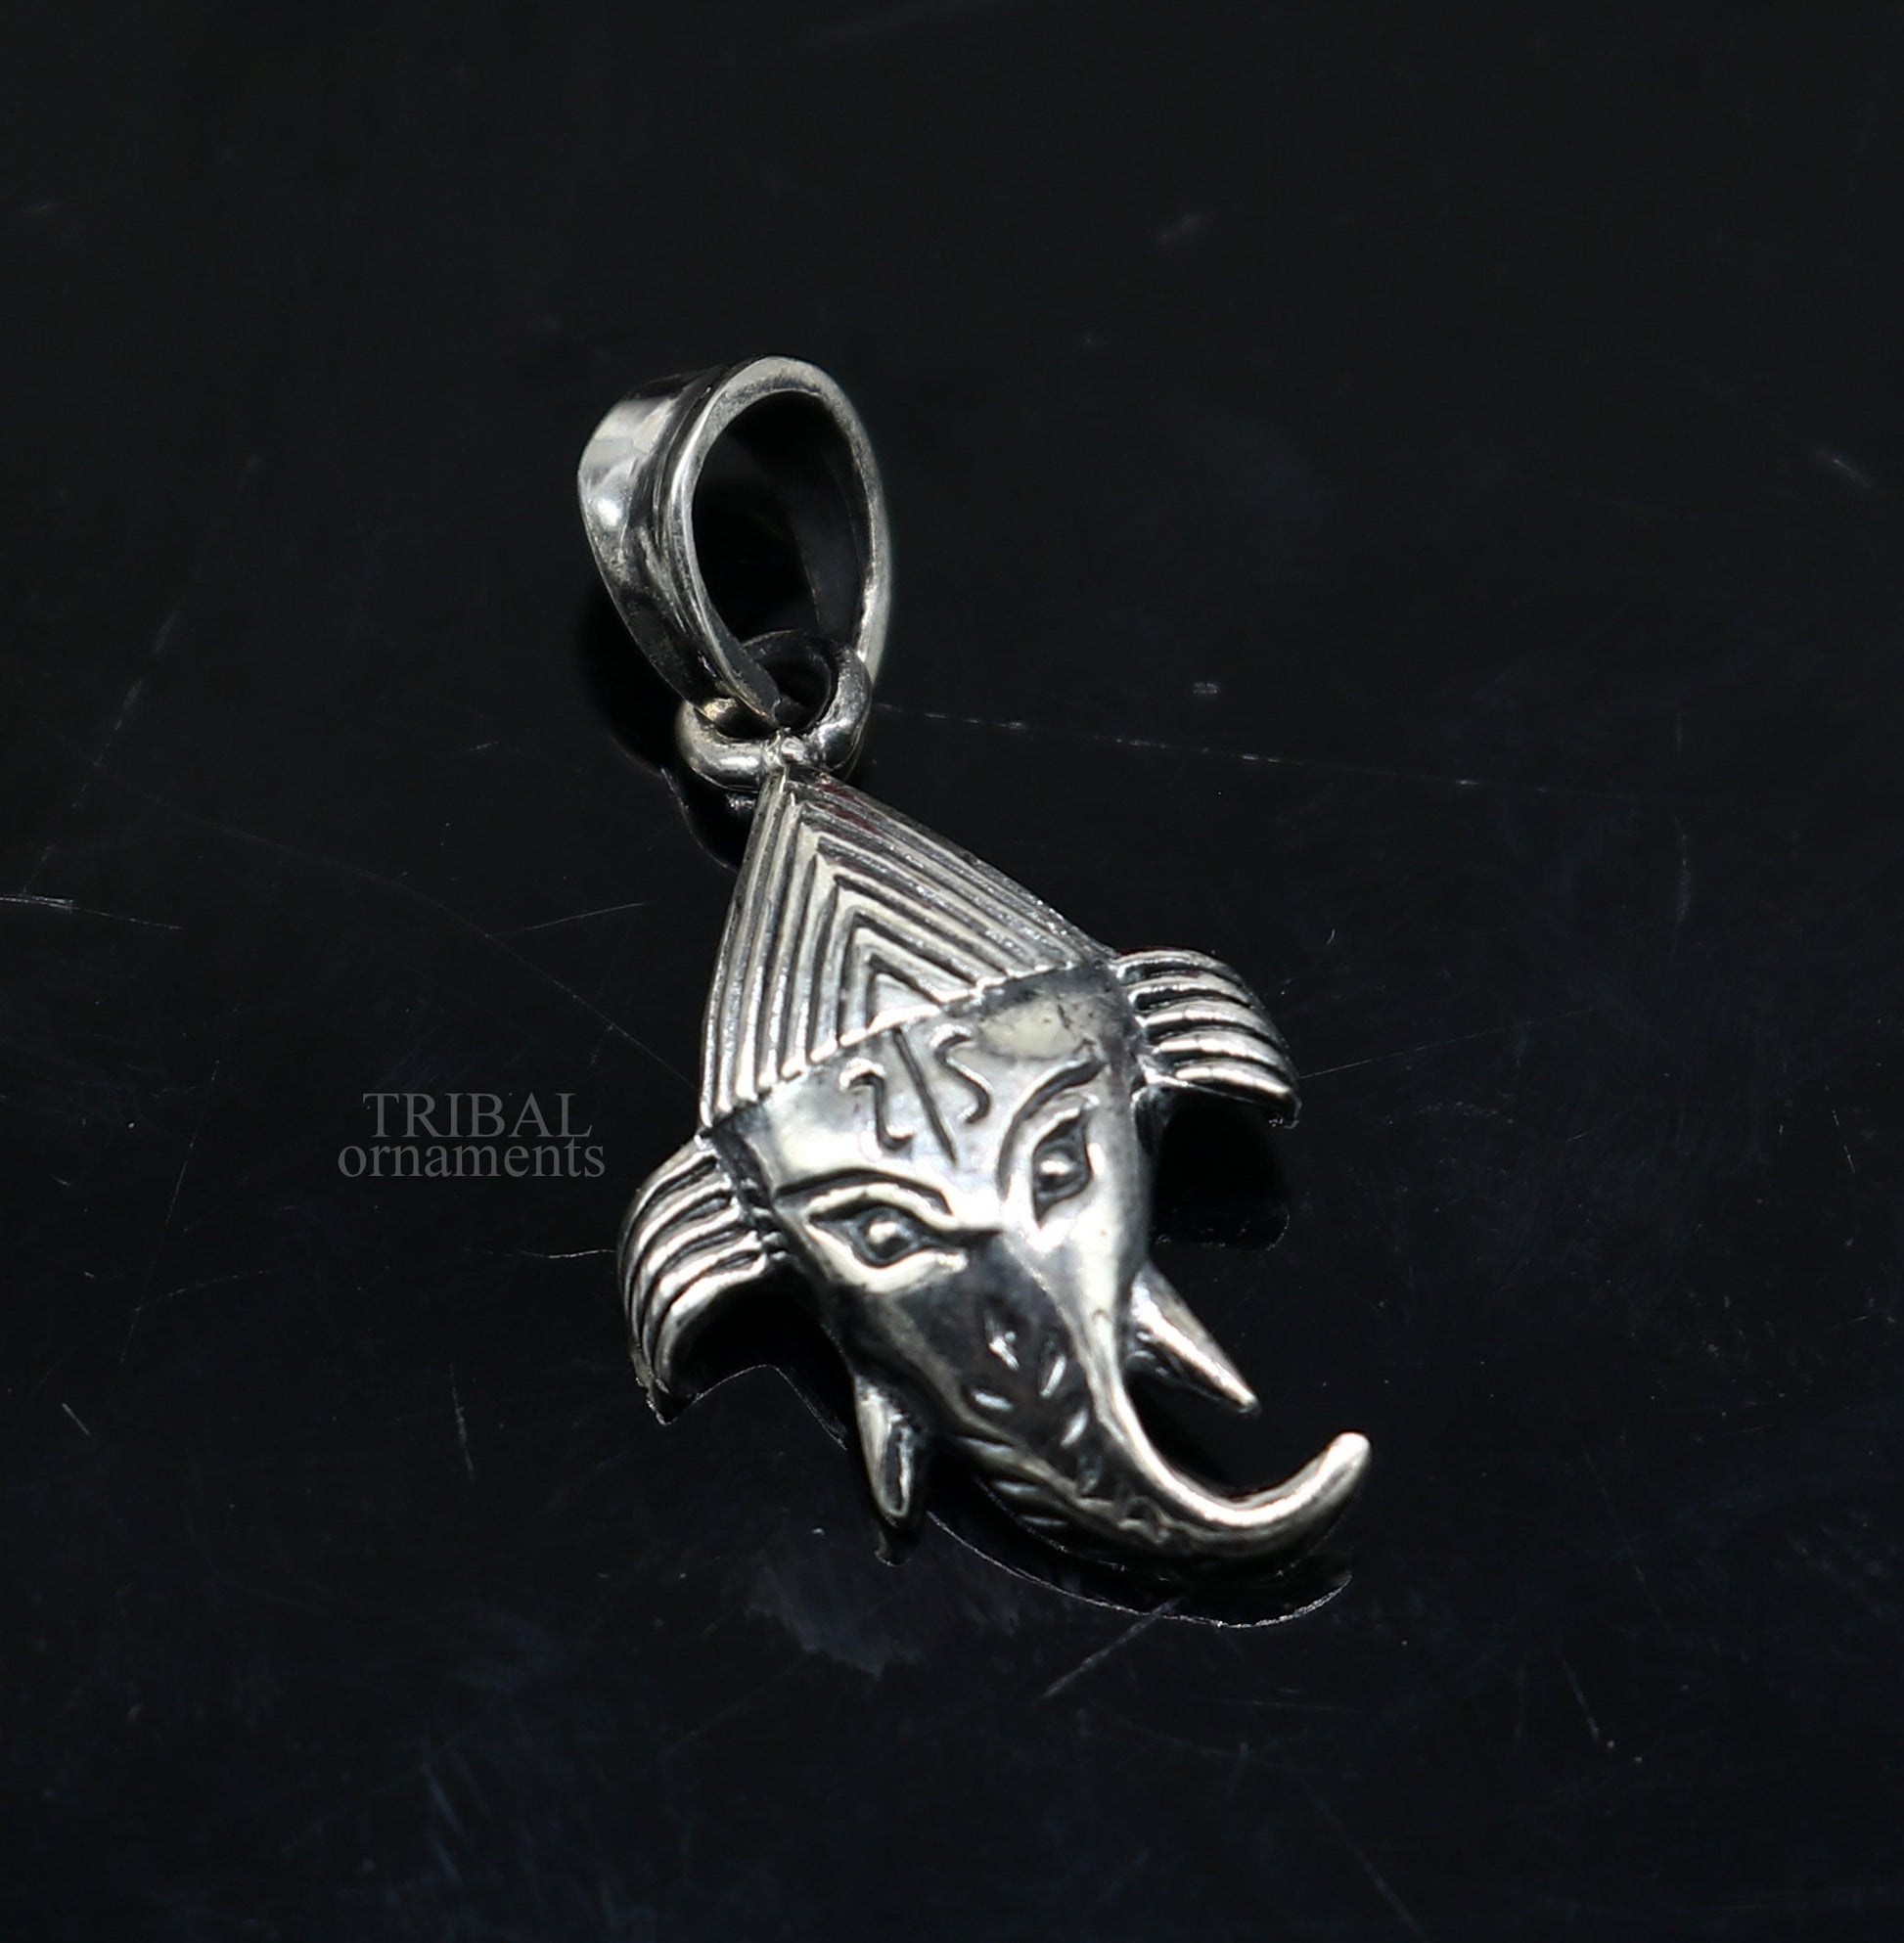 92.5 terling silver Lord Ganesha pendant, excellent unique design stylish unisex personalized gift pendant jewelry ssp1742 - TRIBAL ORNAMENTS